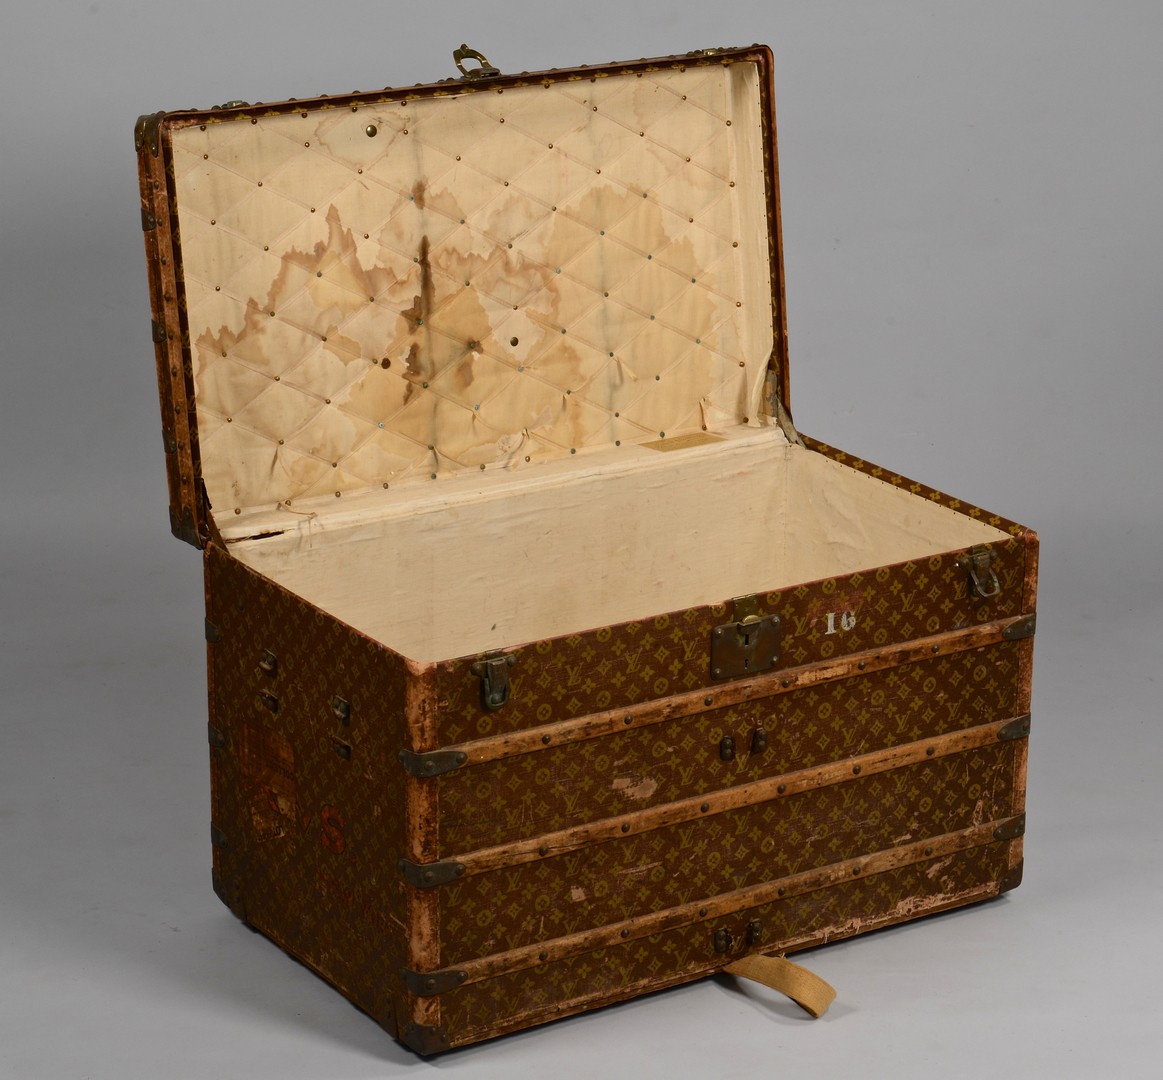 Lot 839: Early 20th c. Louis Vuitton Steamer Trunk